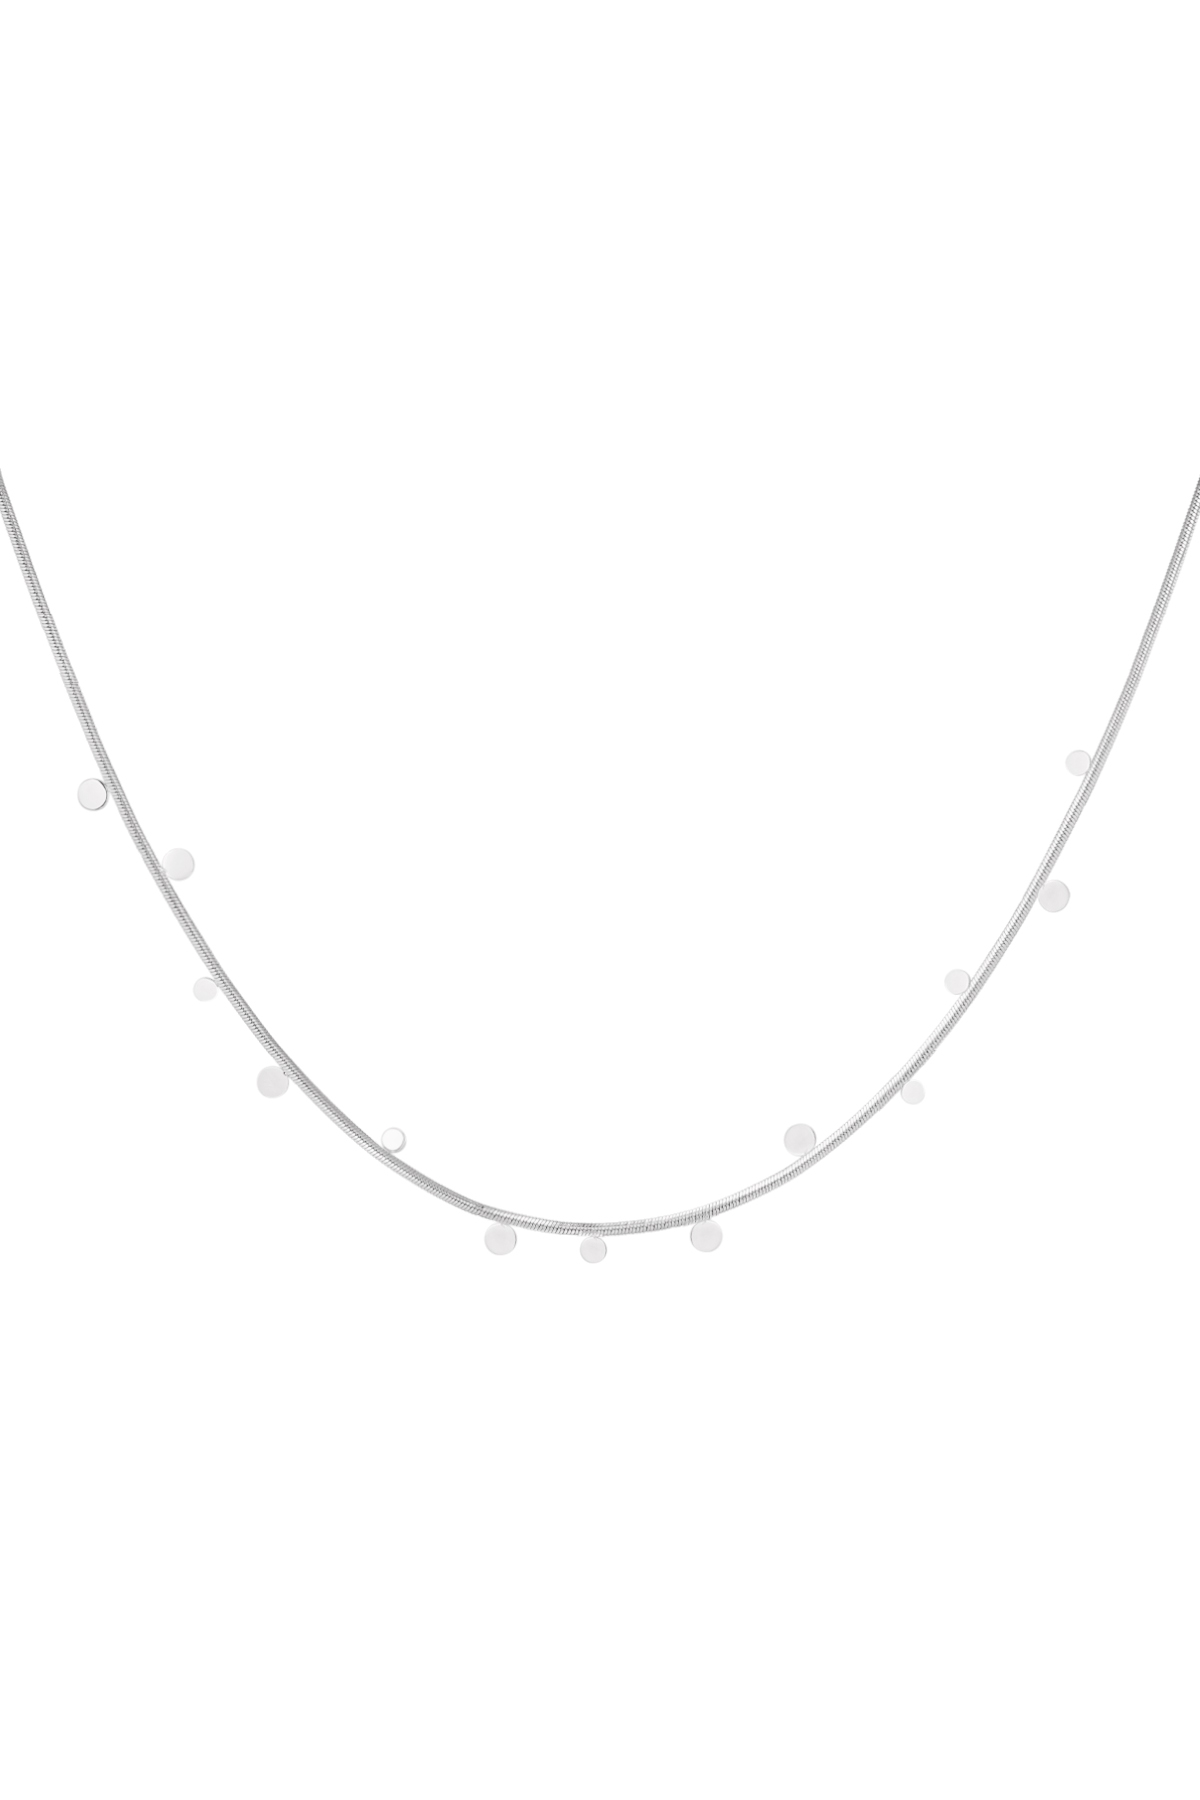 Necklace circle party - silver h5 